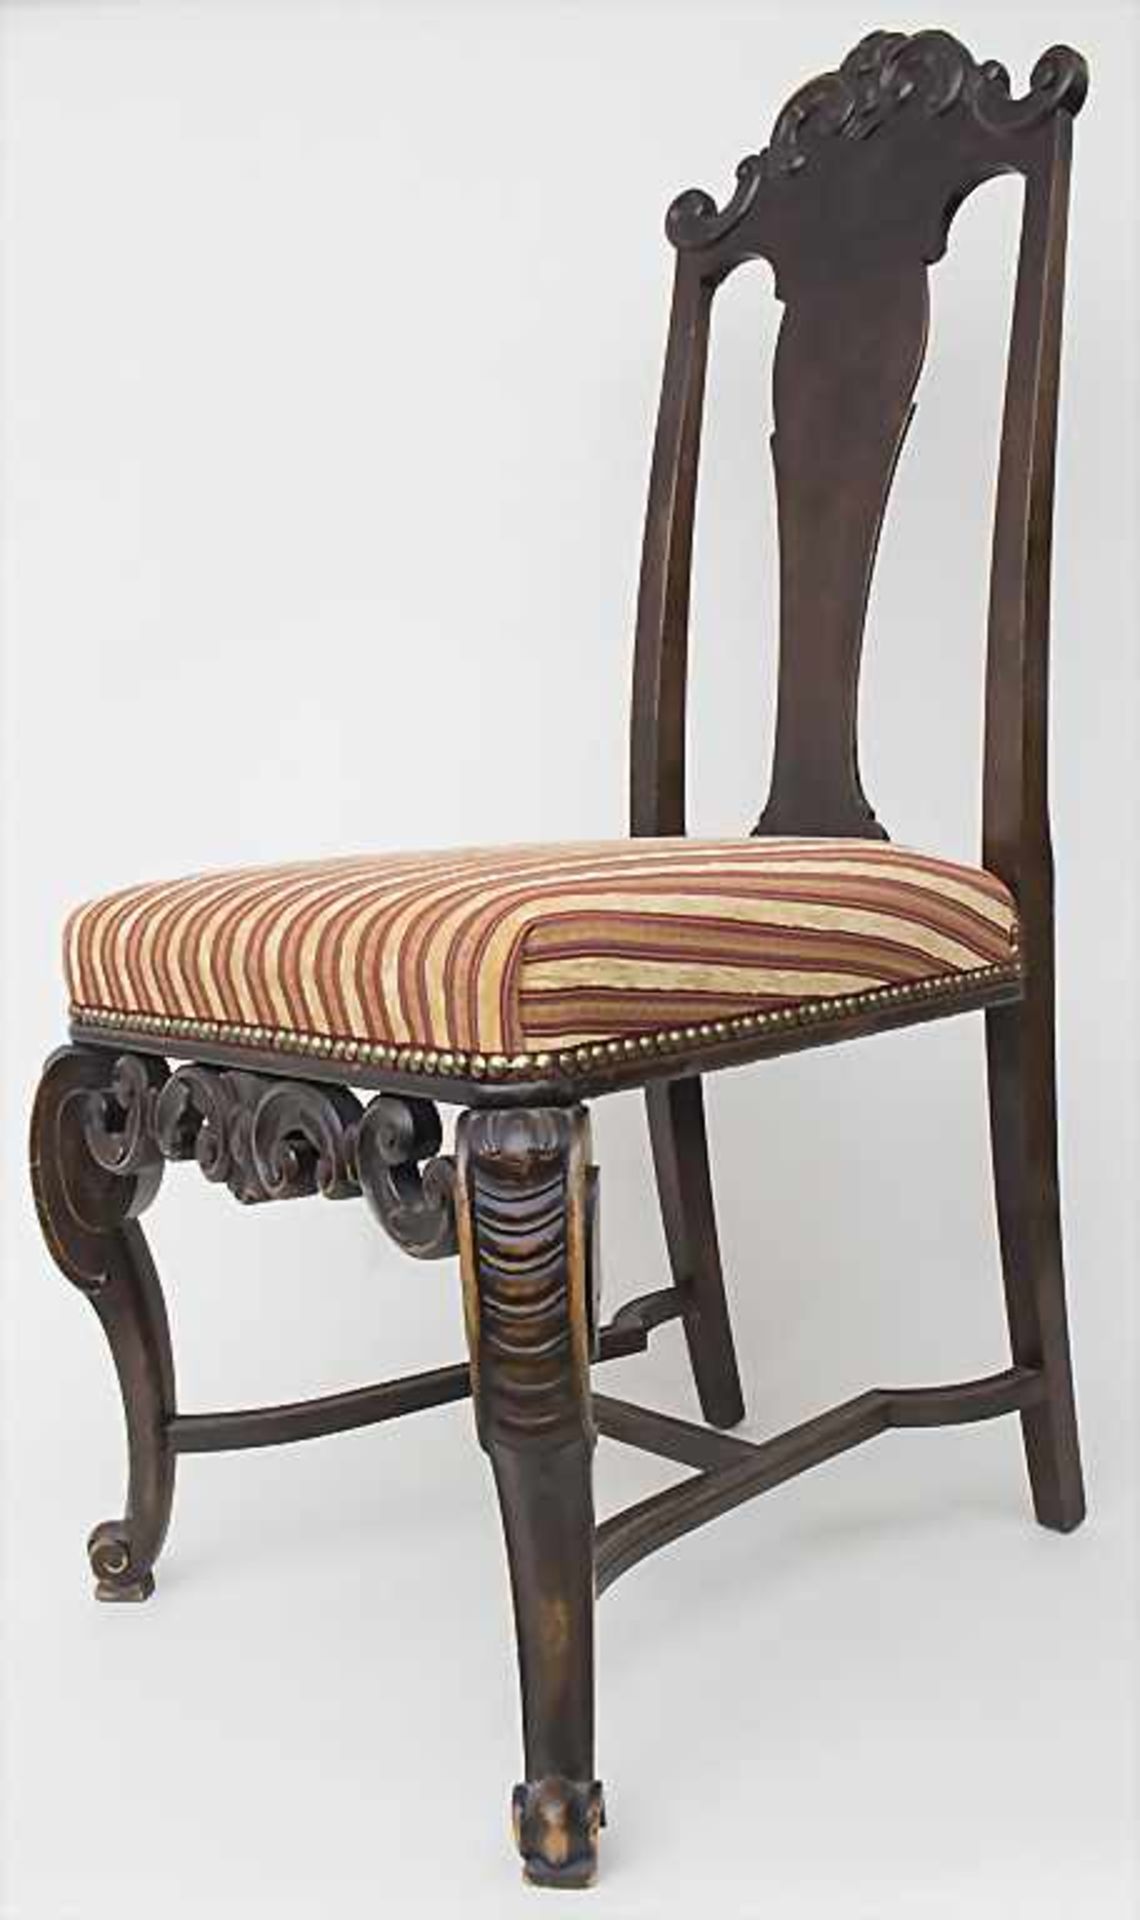 Paar Historismus-Stühle / A pair of historism chairs, 19. Jh.< - Image 2 of 5